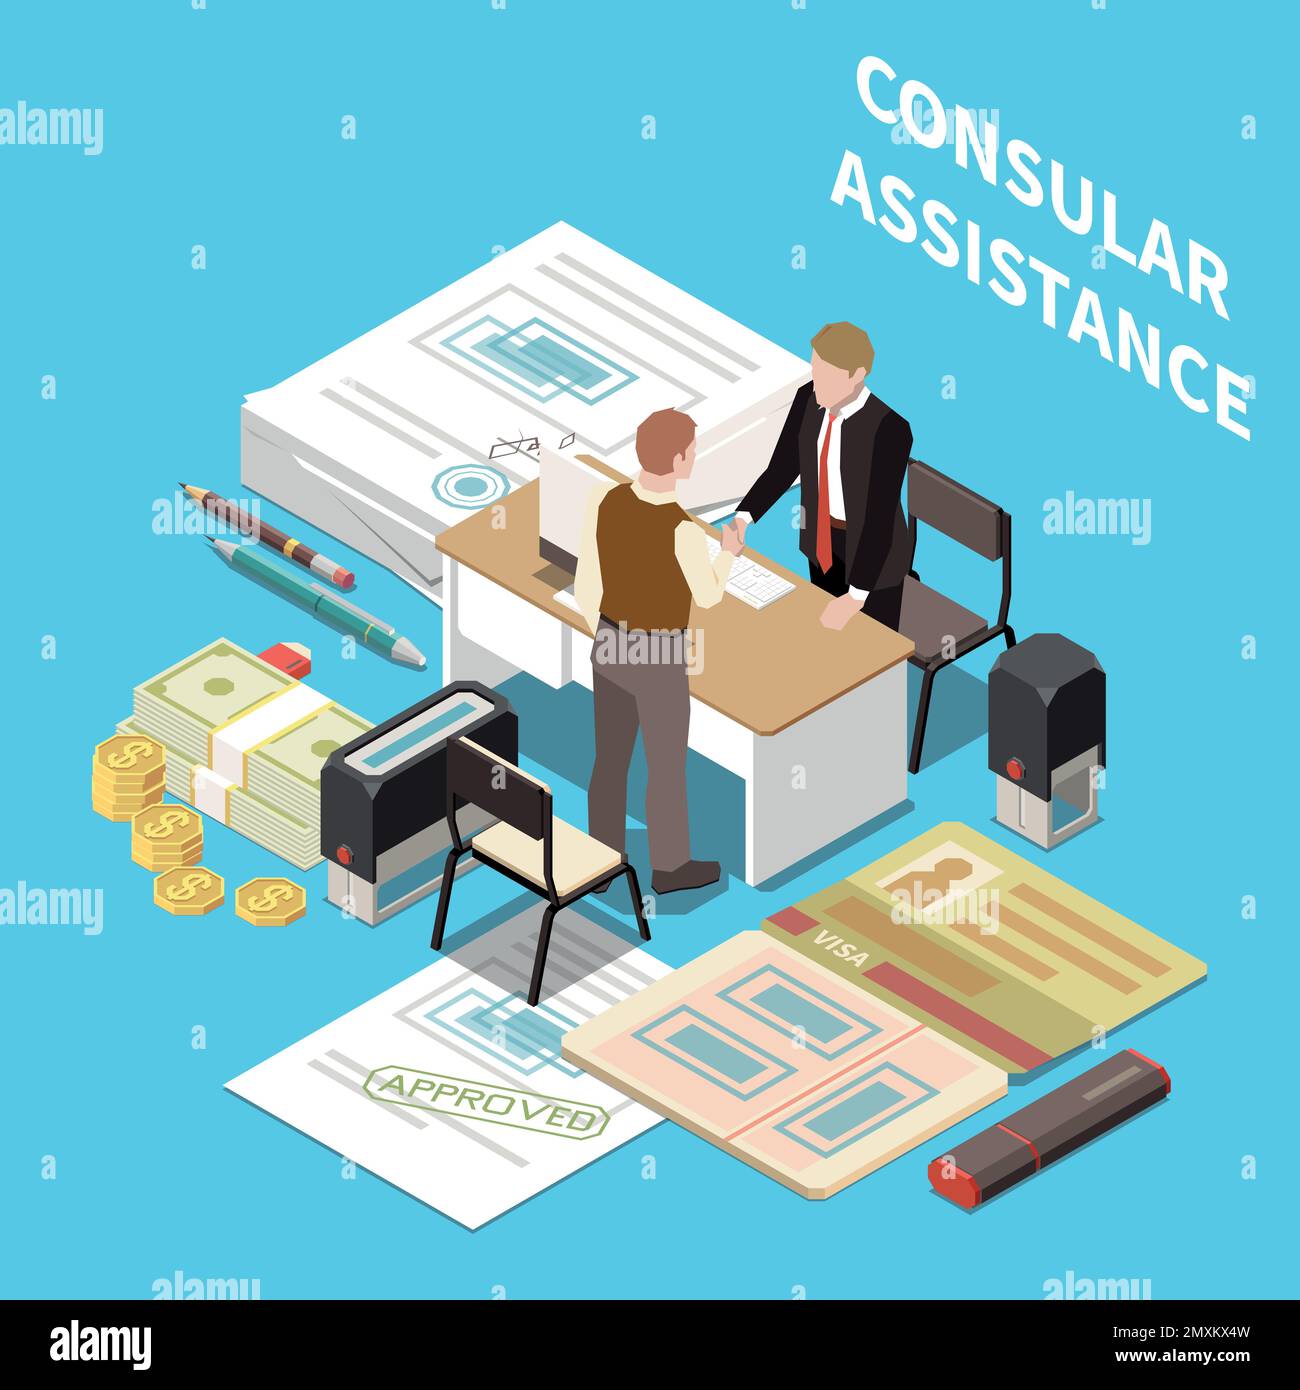 Consular assistance isometric composition with diplomat helping tourist with foreign country travel document vector illustration Stock Vector